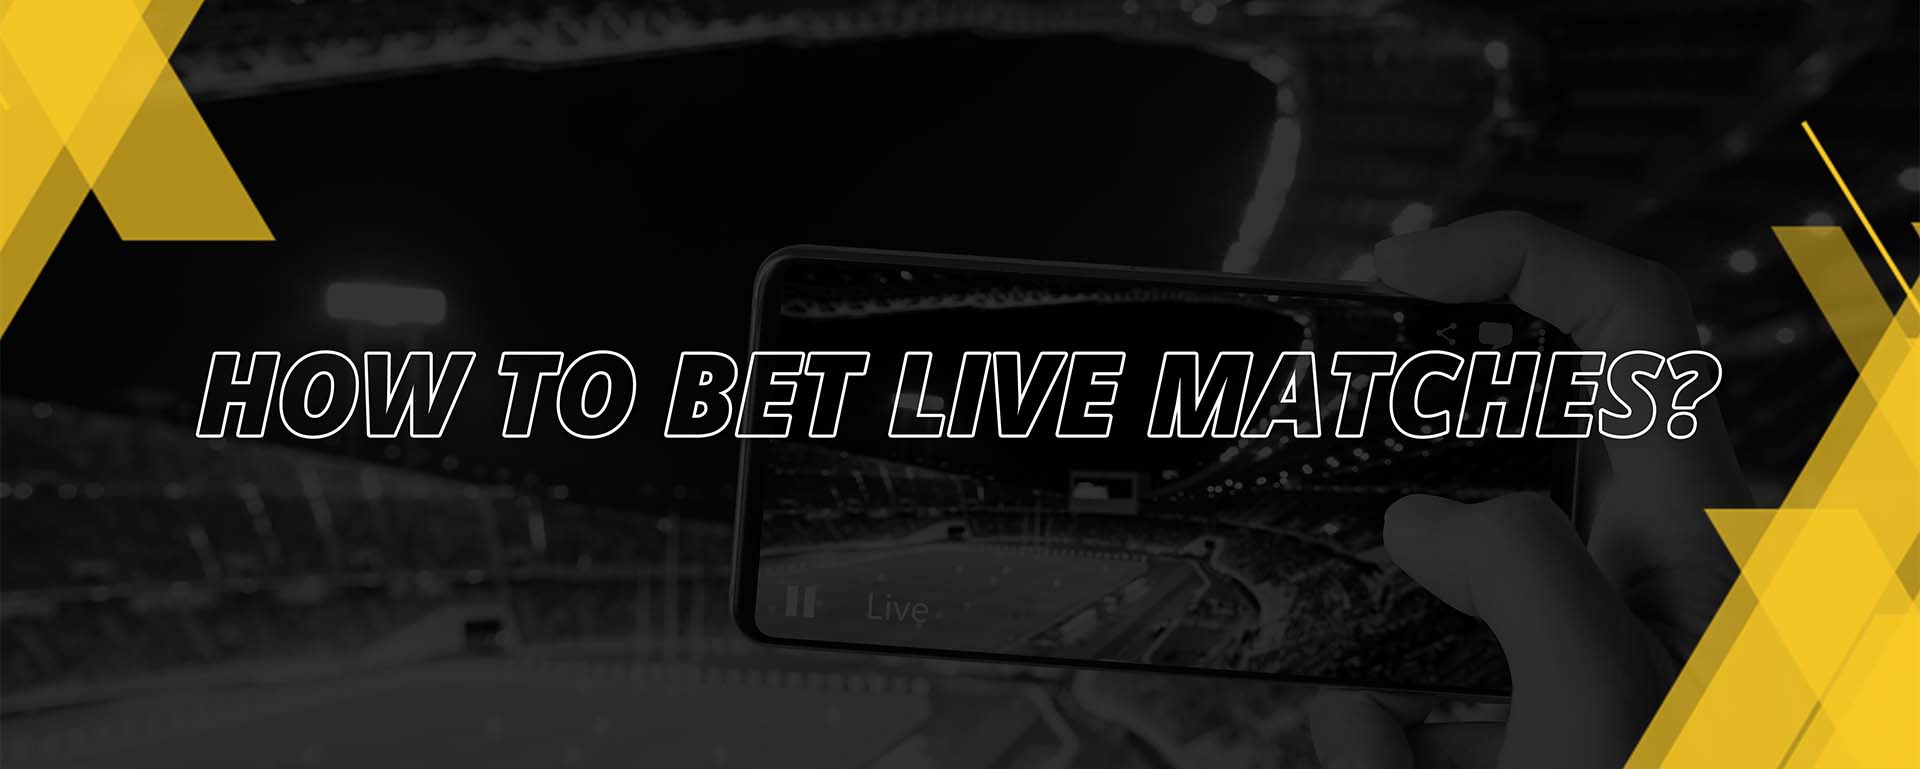 HOW TO BET LIVE MATCHES?